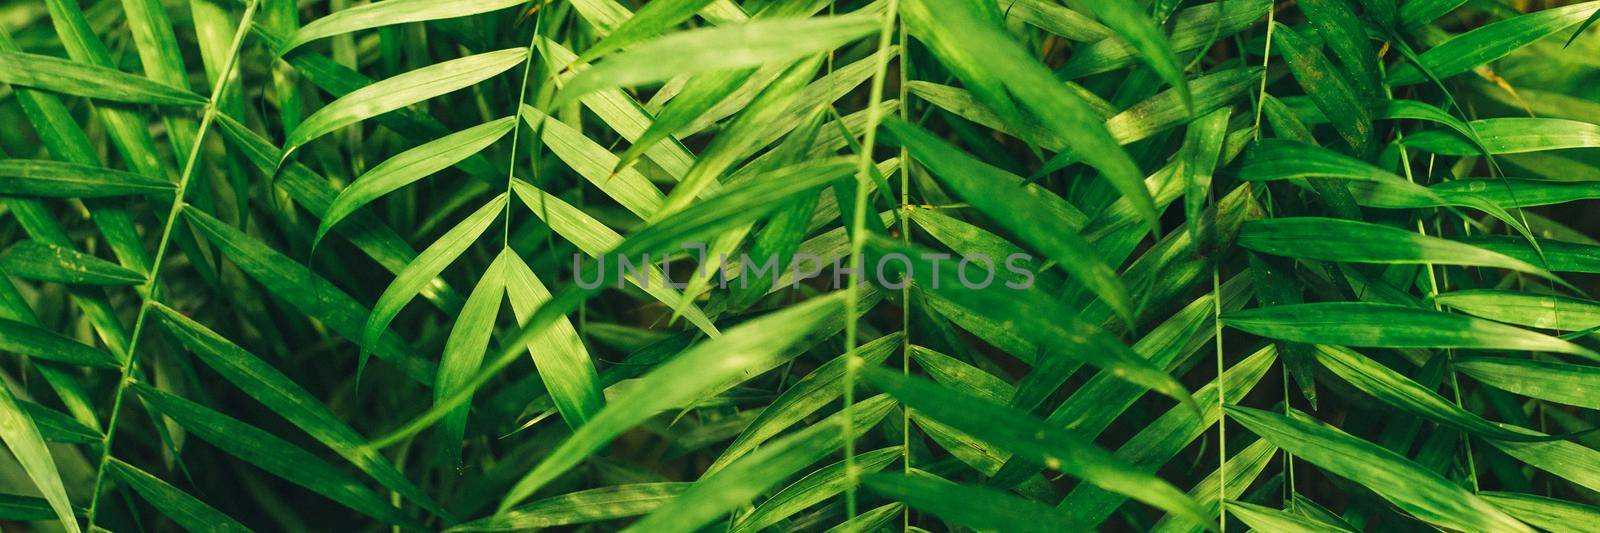 Green thin palm leaves plant growing in the wild, tropical forest plants, evergreen vines abstract color on a dark background. Web banner